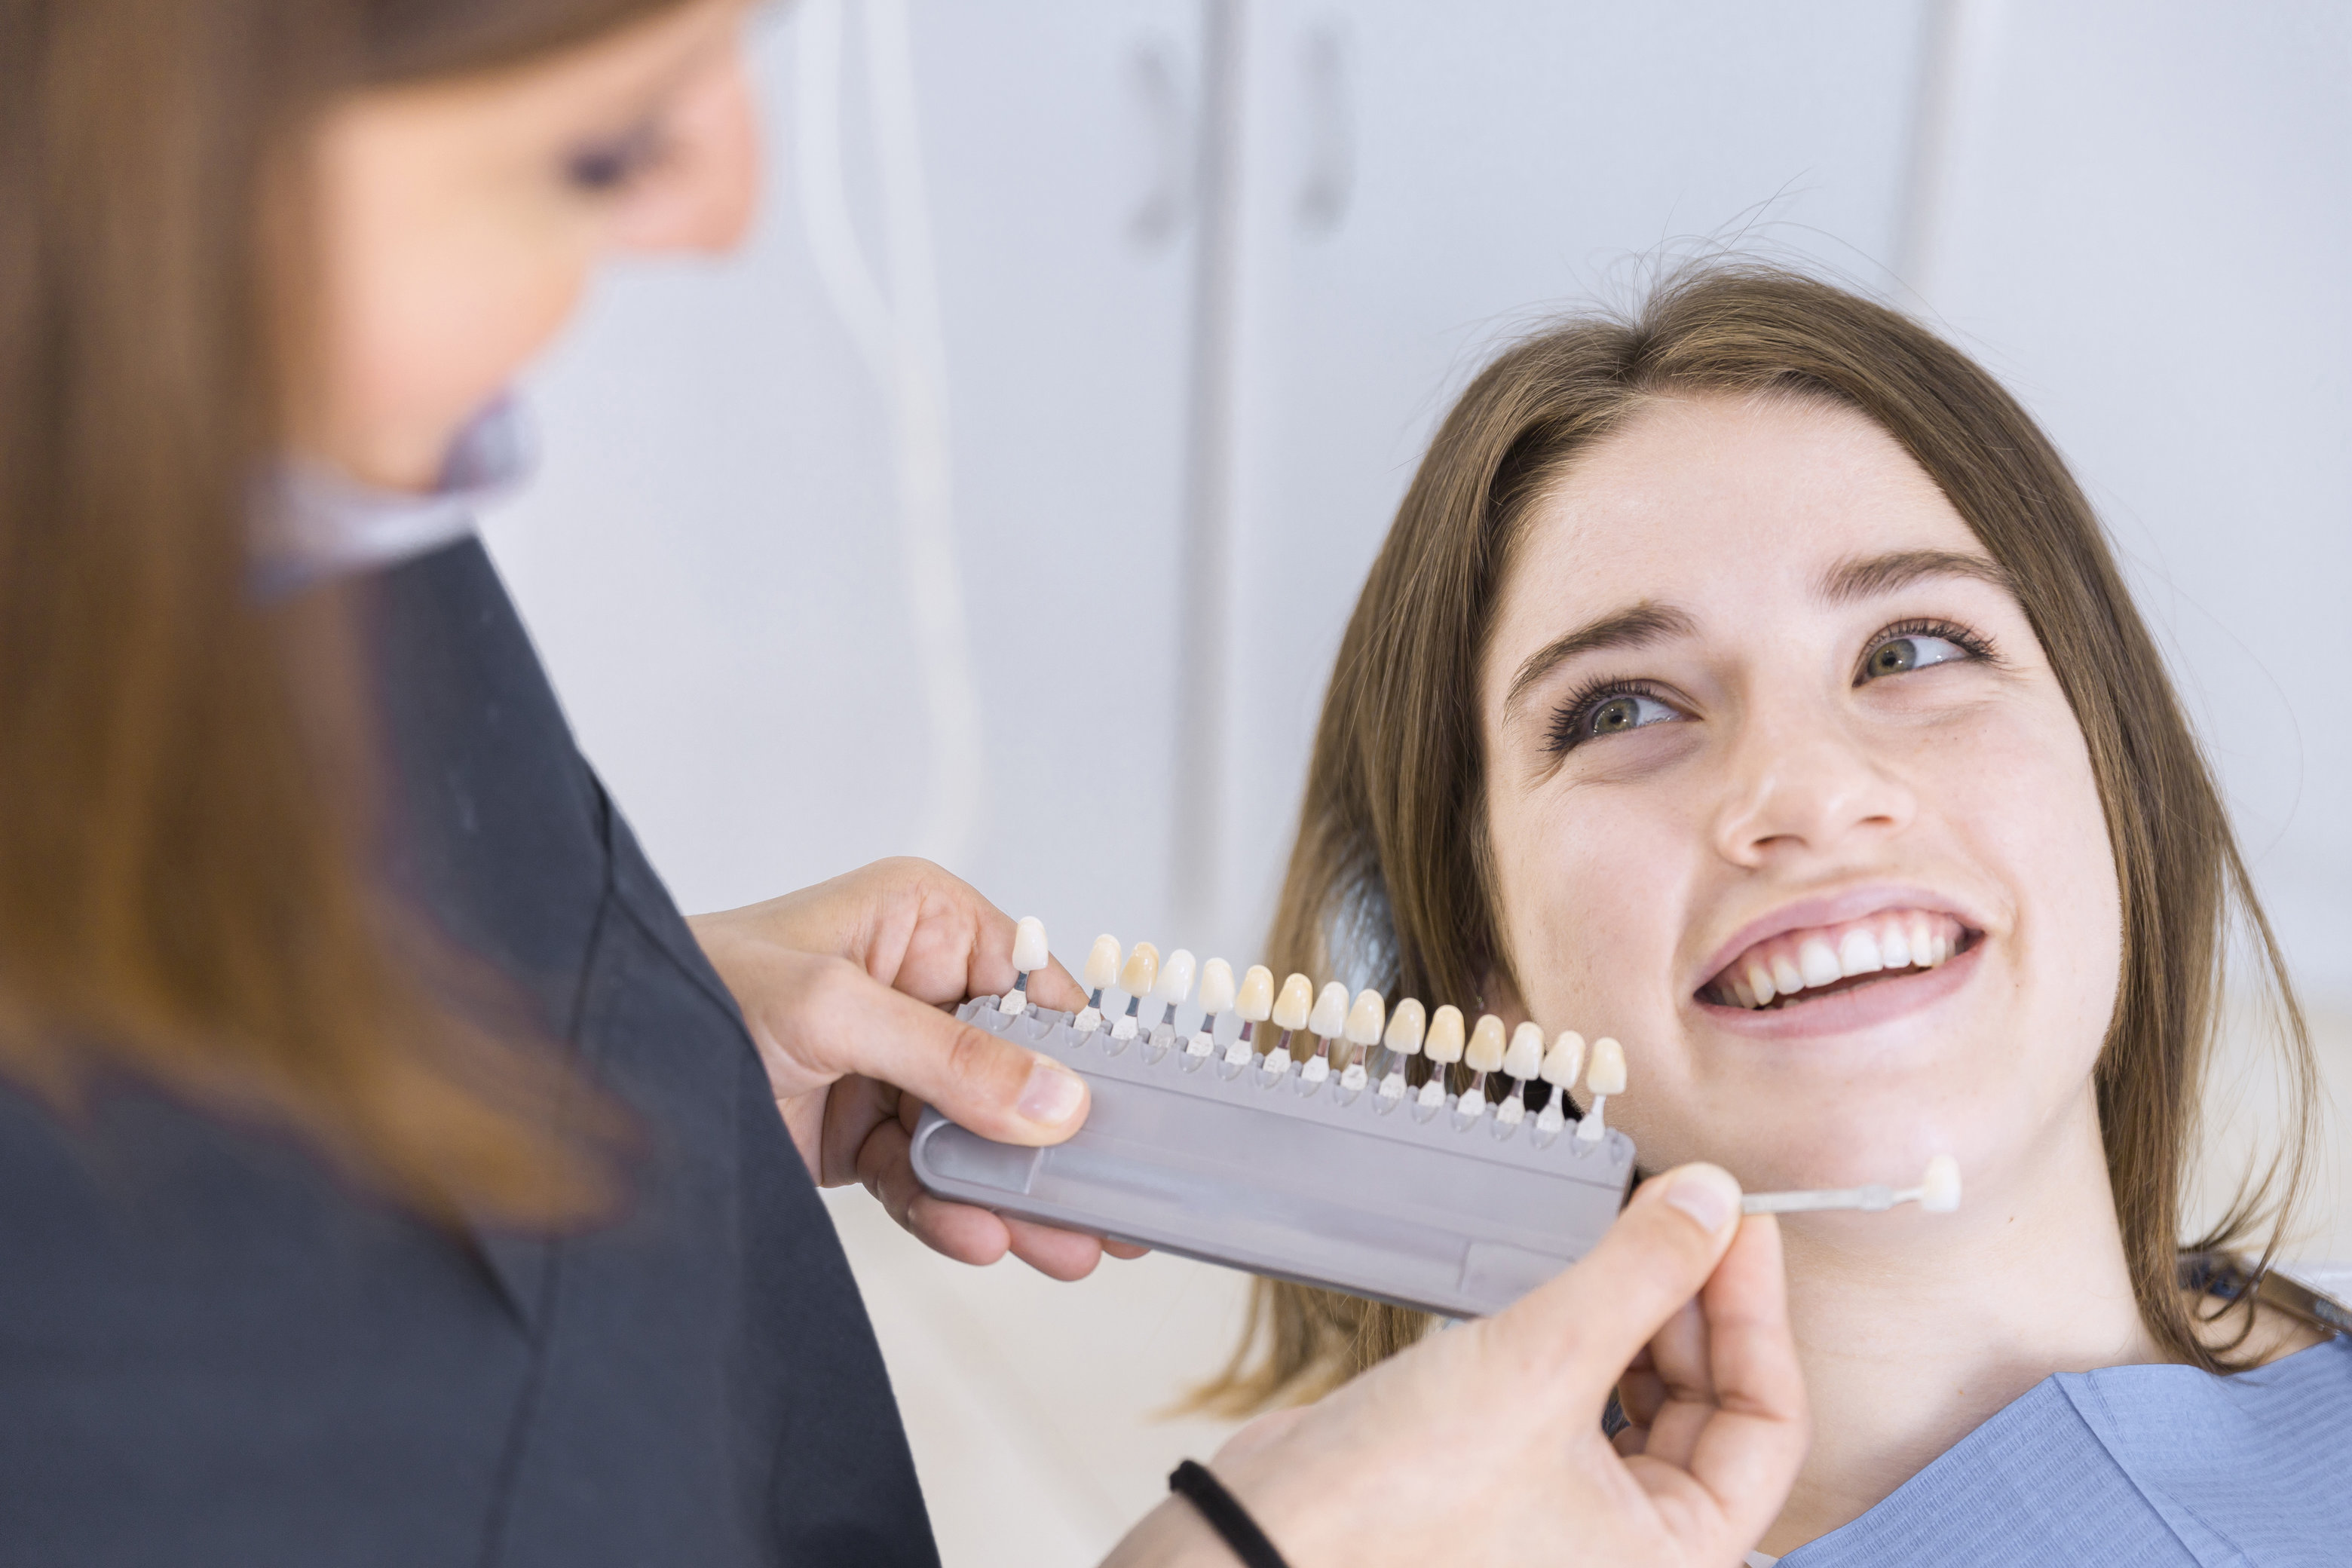 Tooth bonding is a simple procedure that can improve your smile.